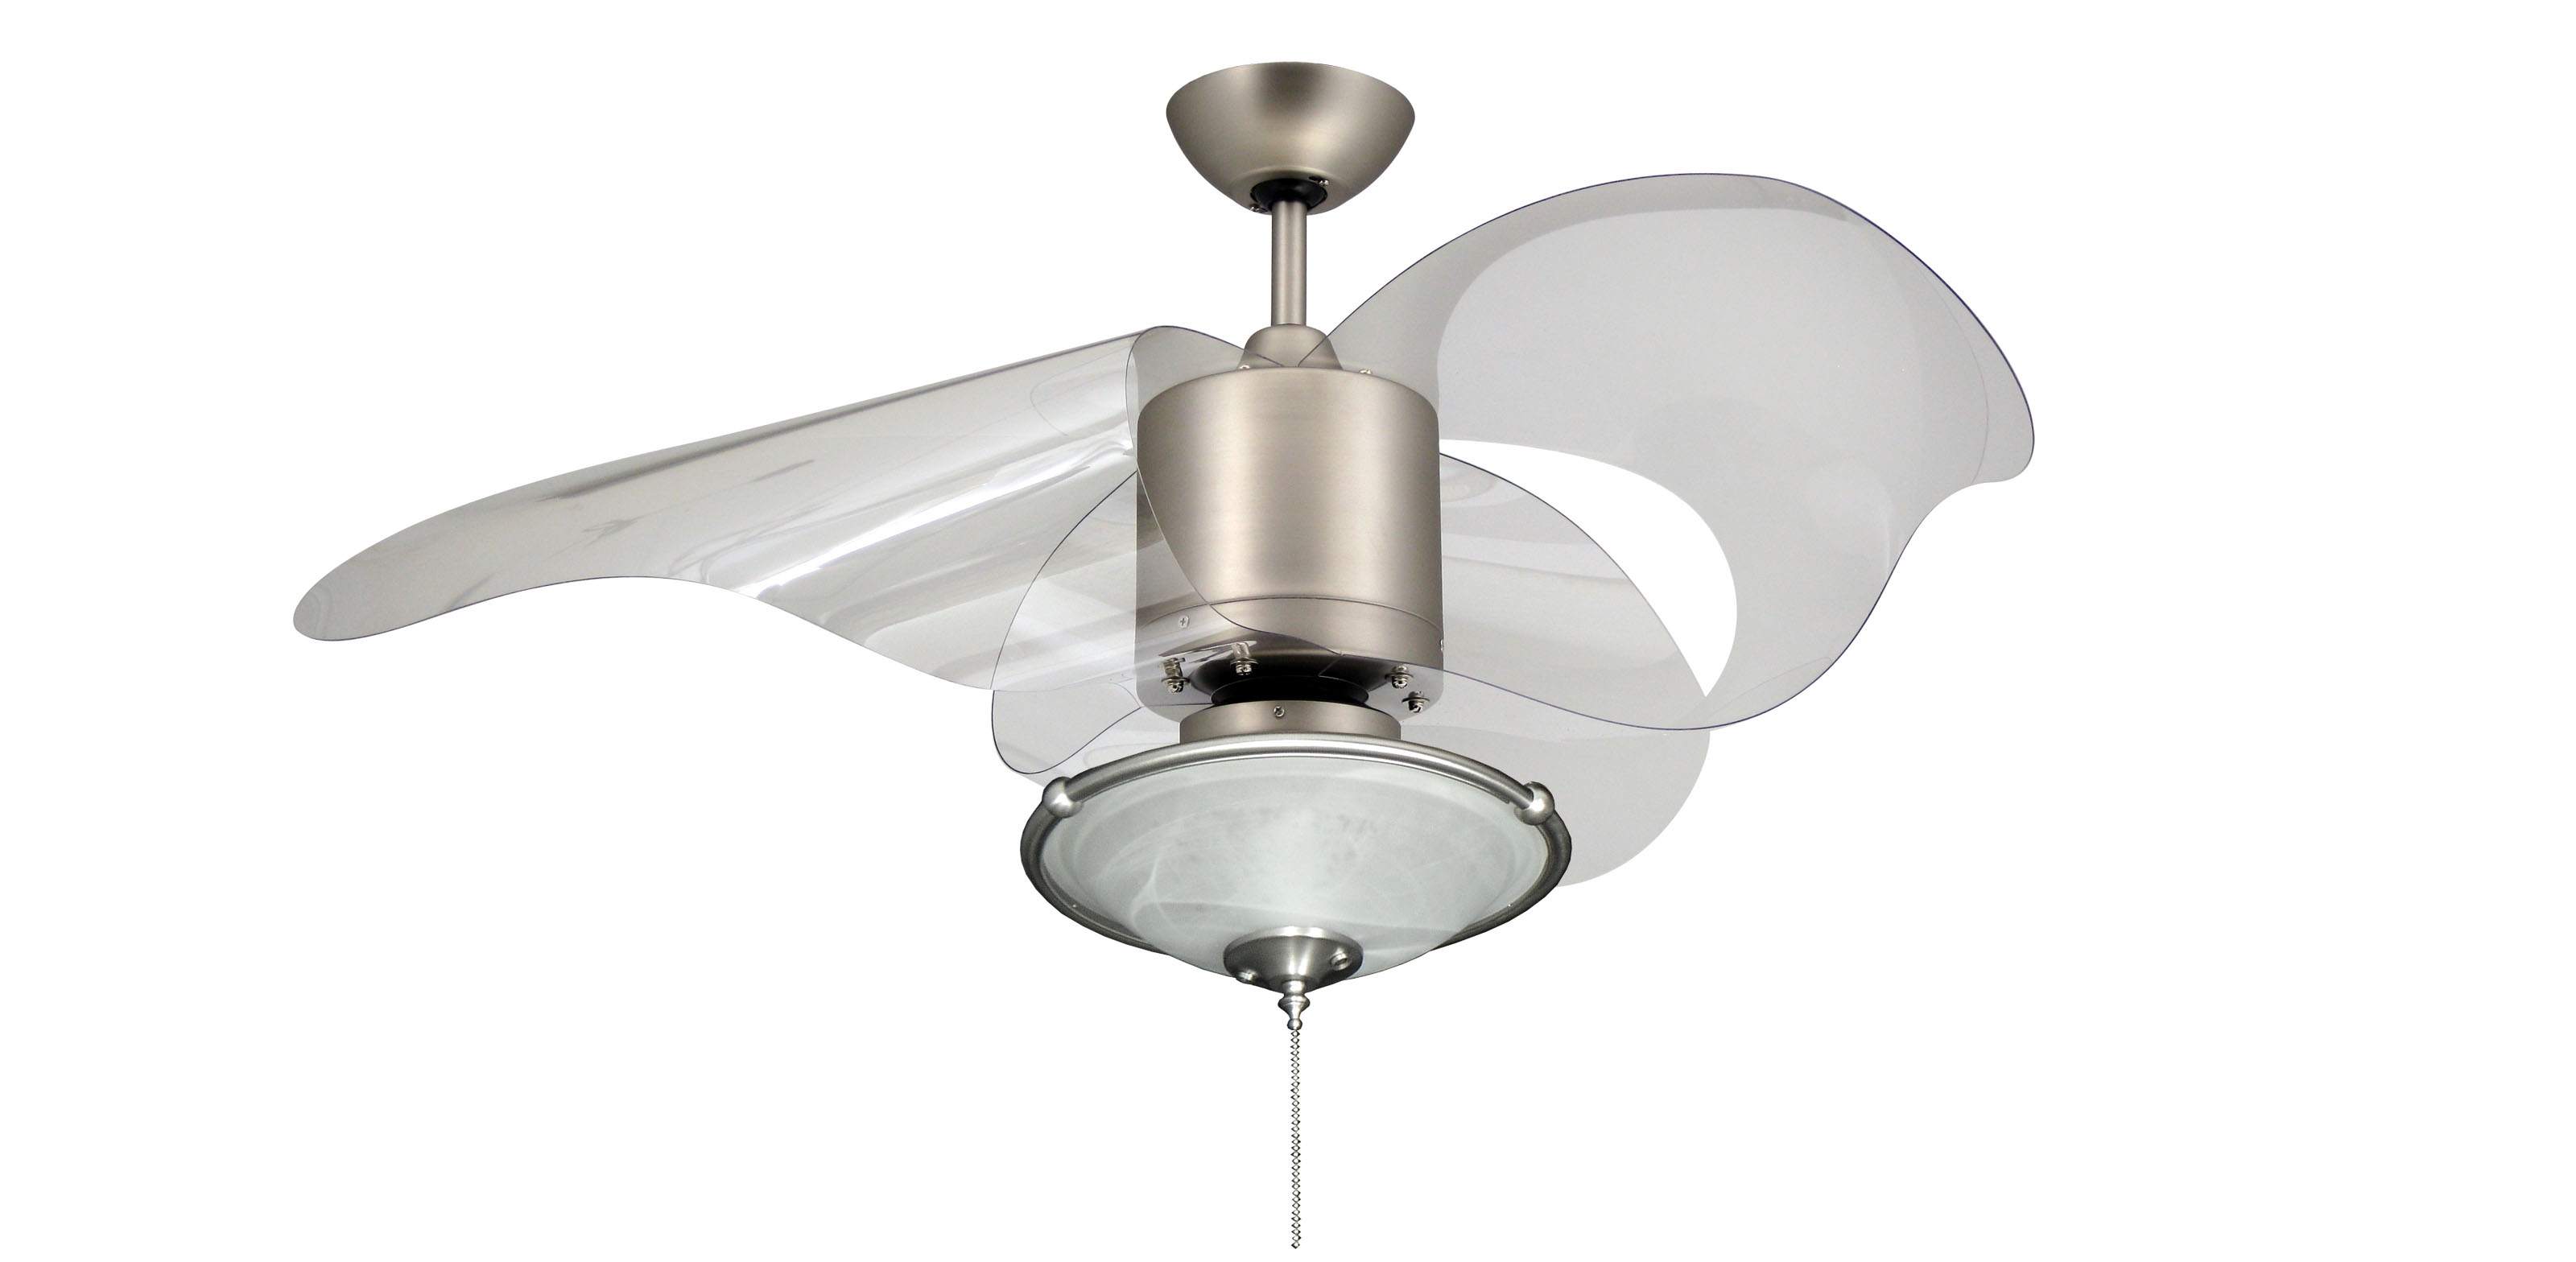 Permalink to Unique Ceiling Fans With Lights